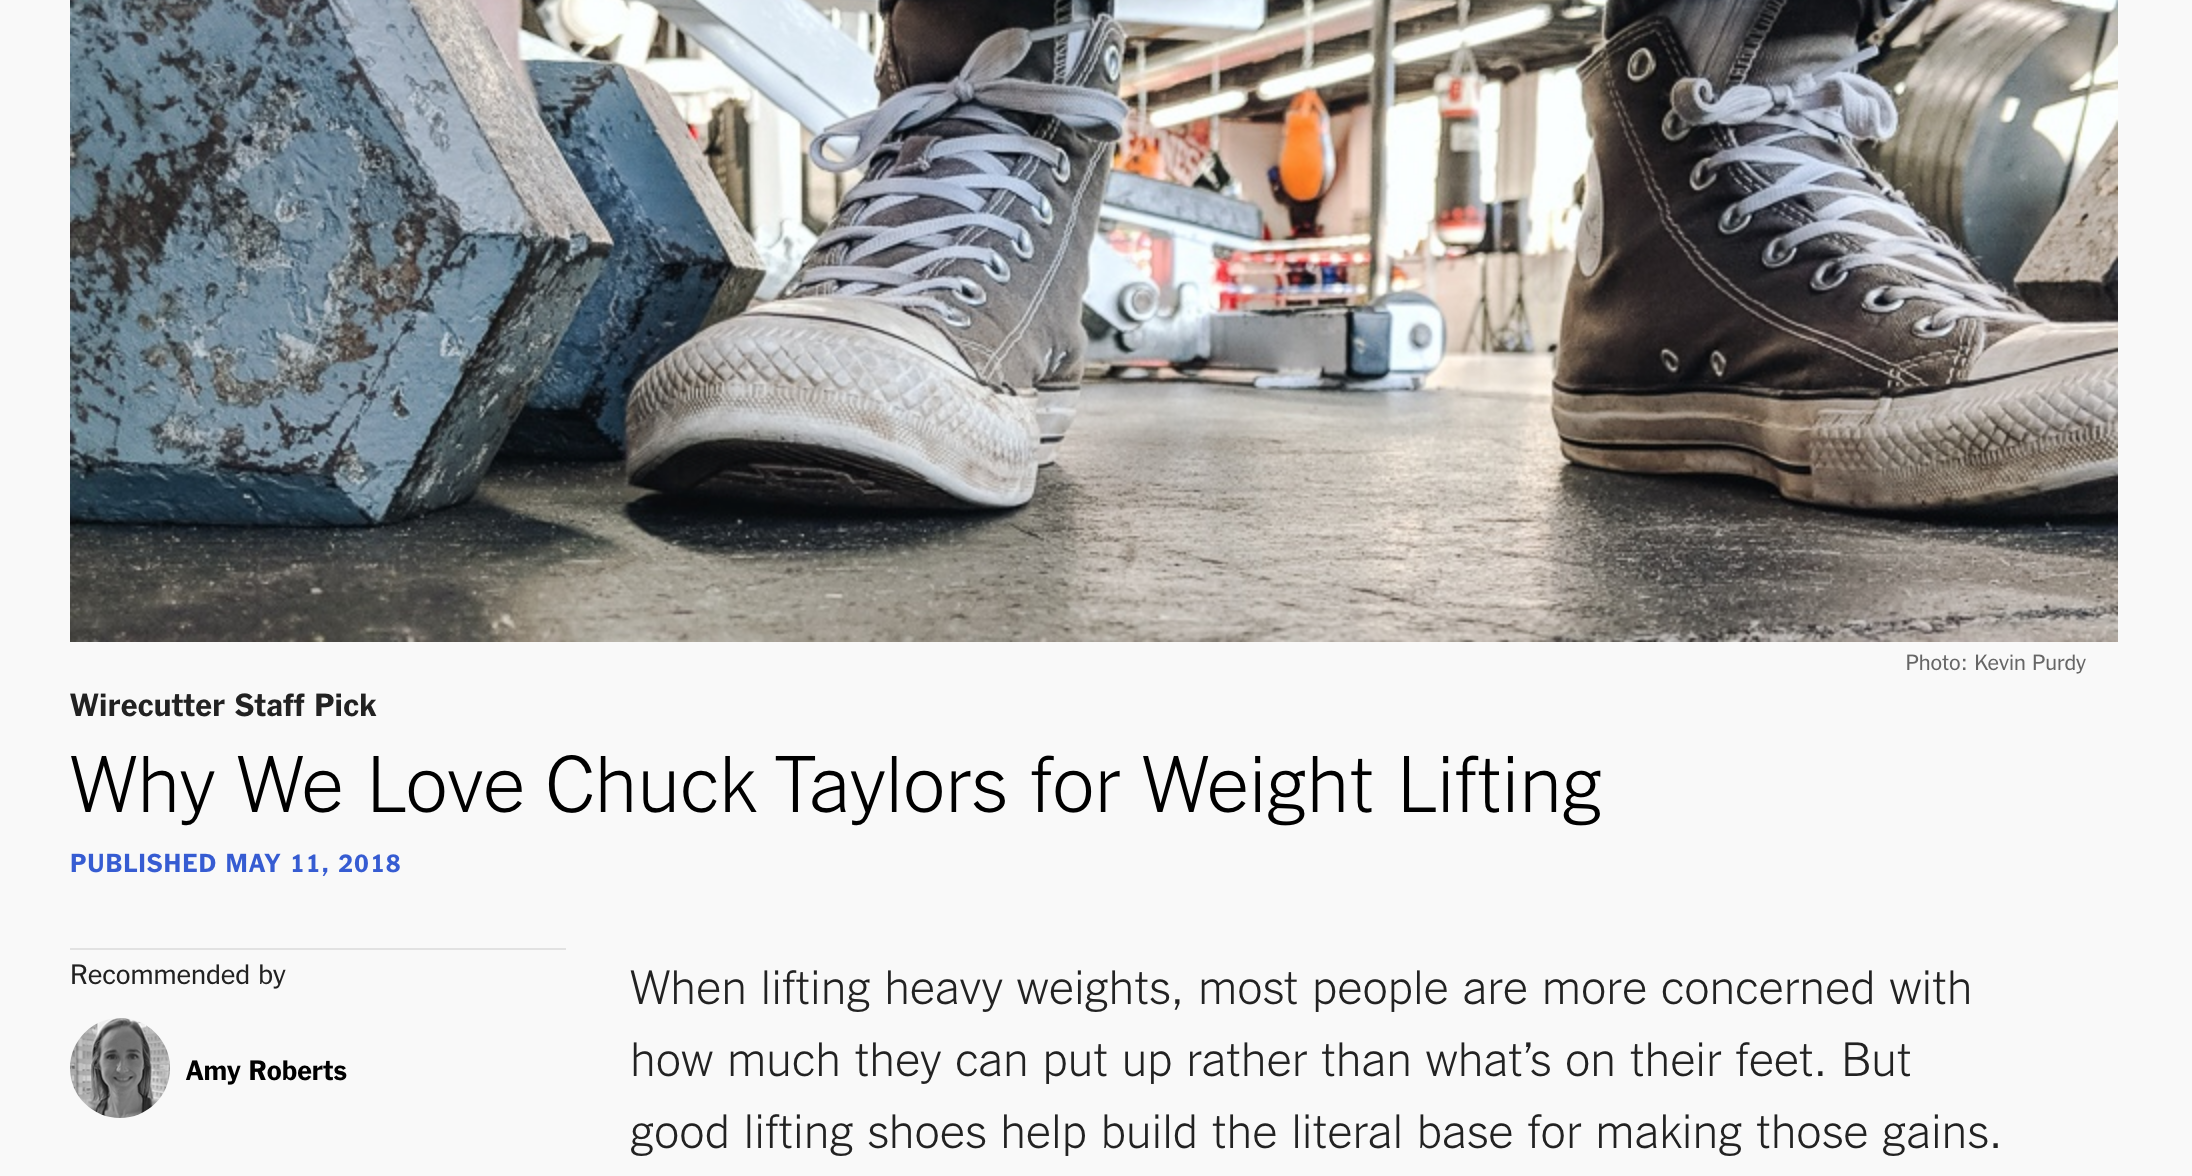 Chucks-for-lifting-wirecutter